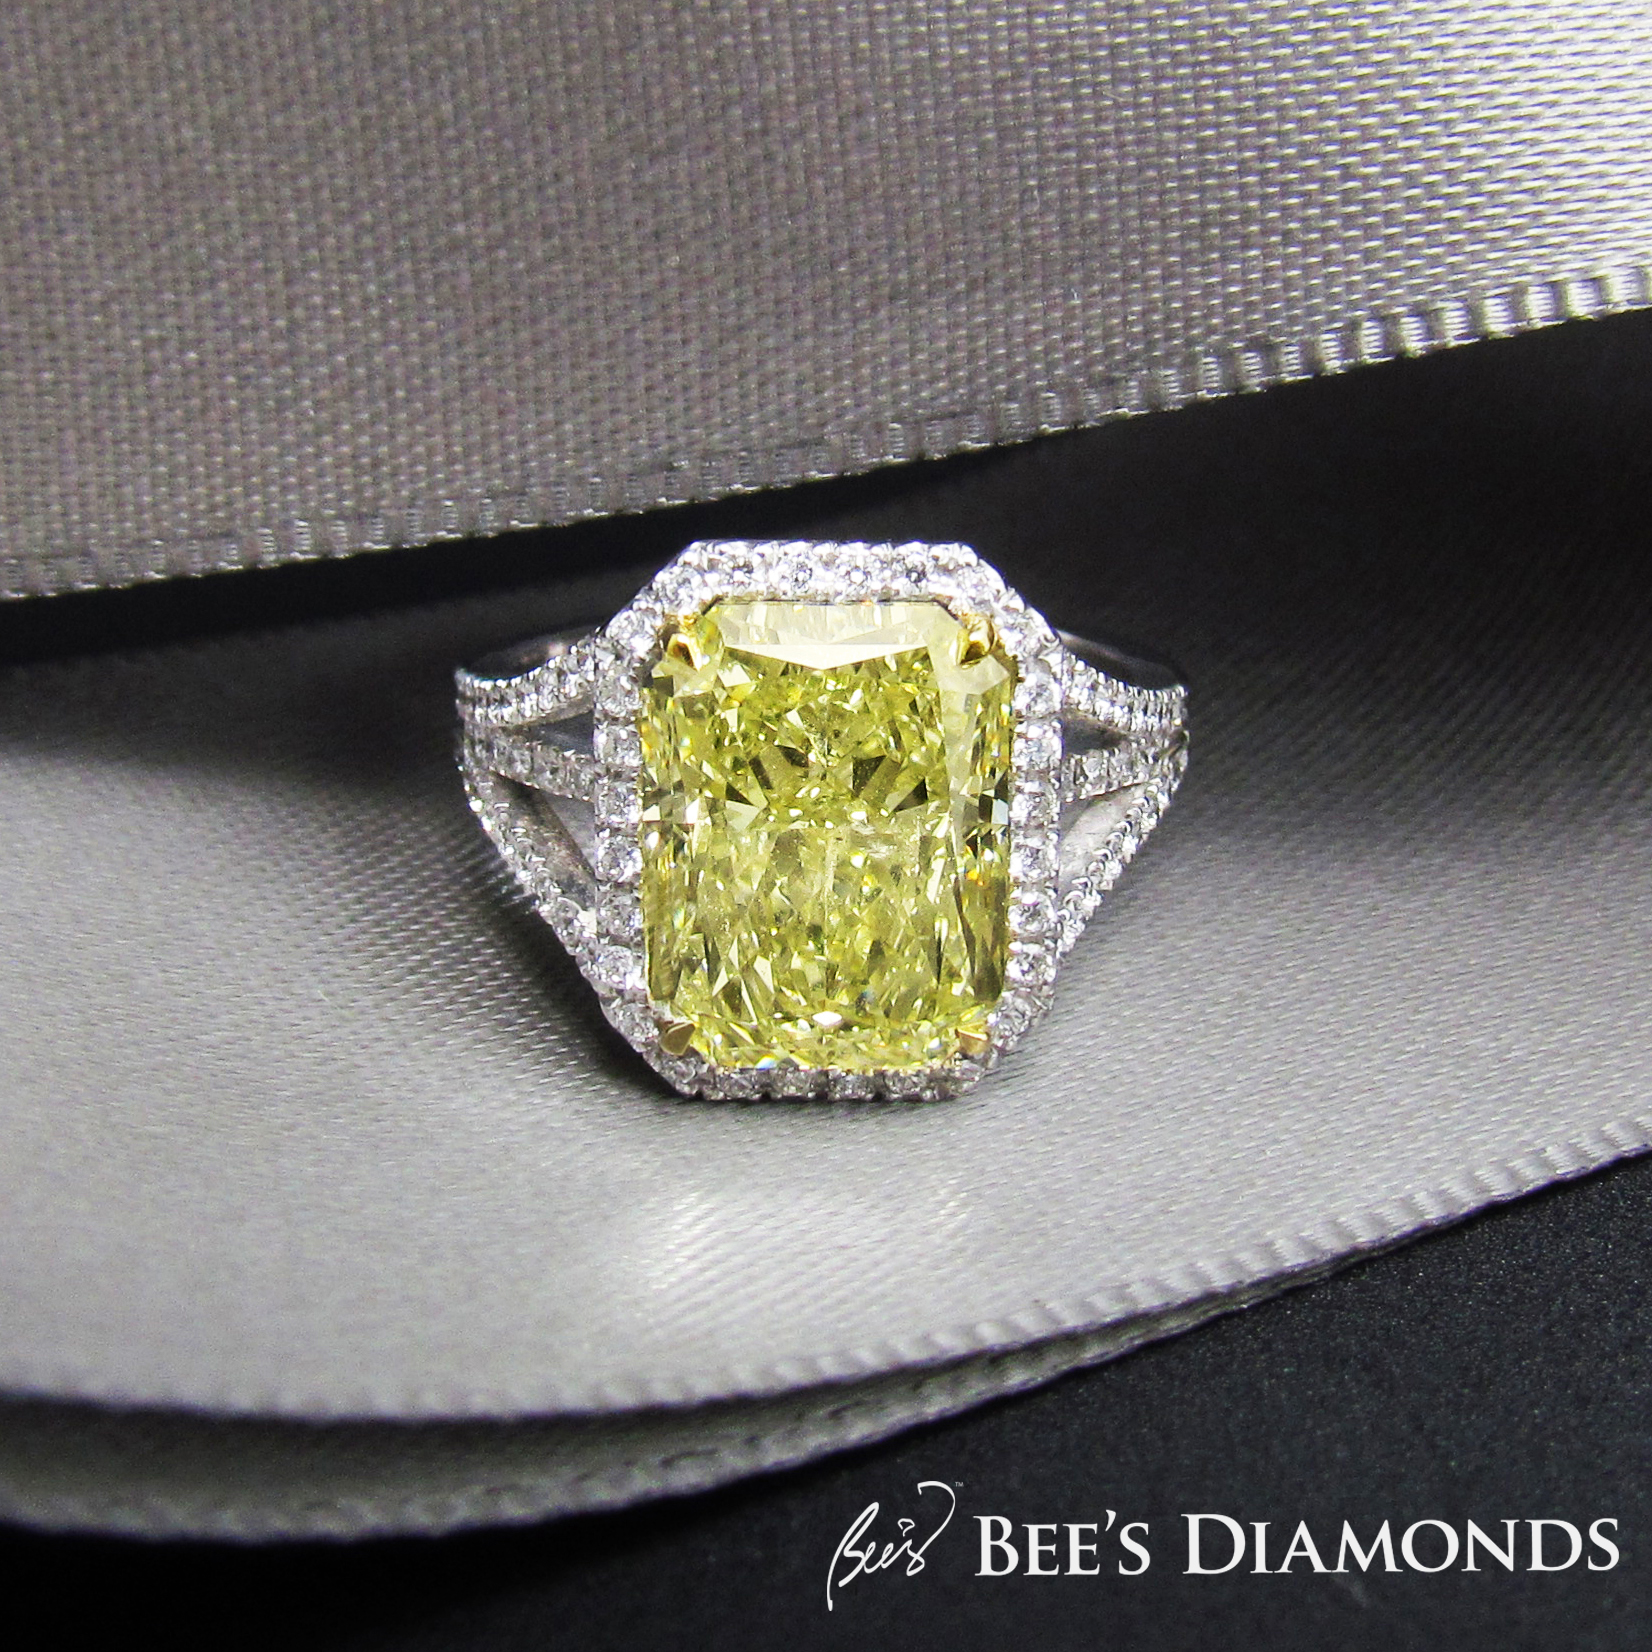 Large radiant cut fancy yellow diamond ring with GIA certificate